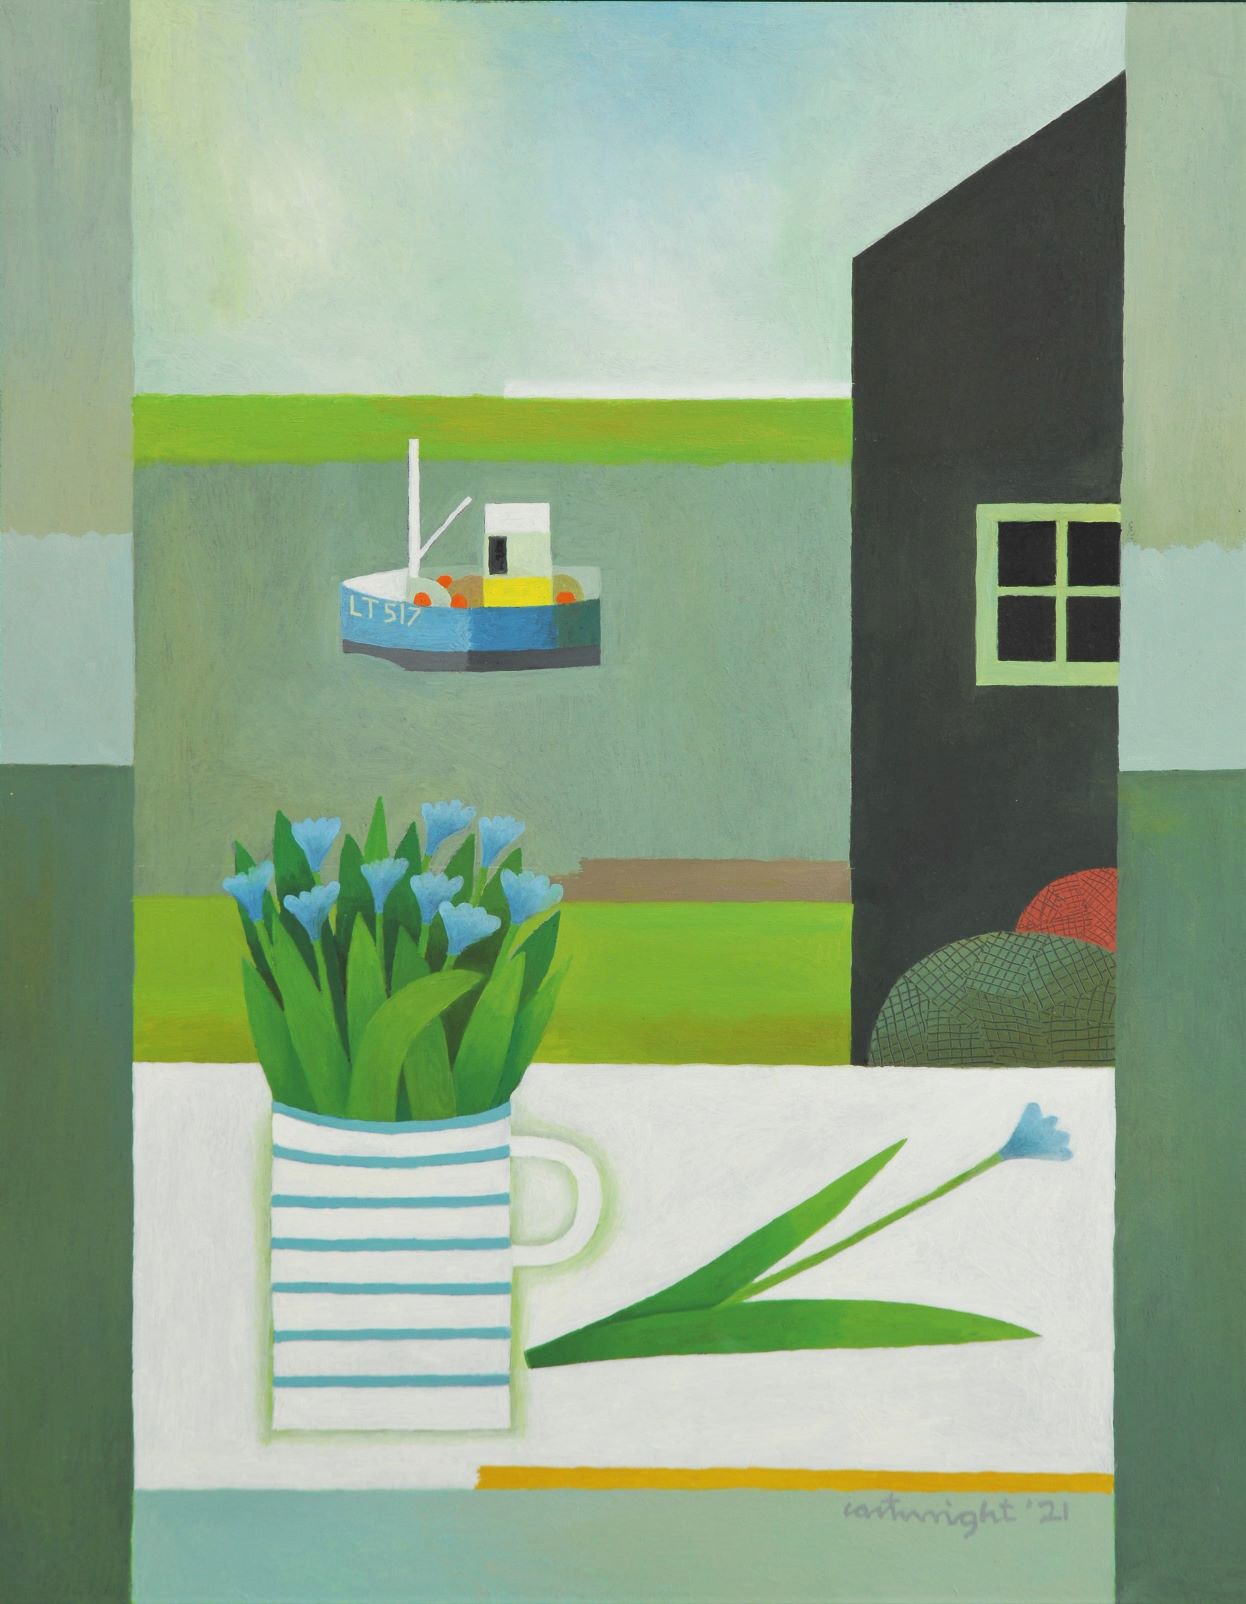 Estuary Landscape With Flowers by reg cartwright 2021